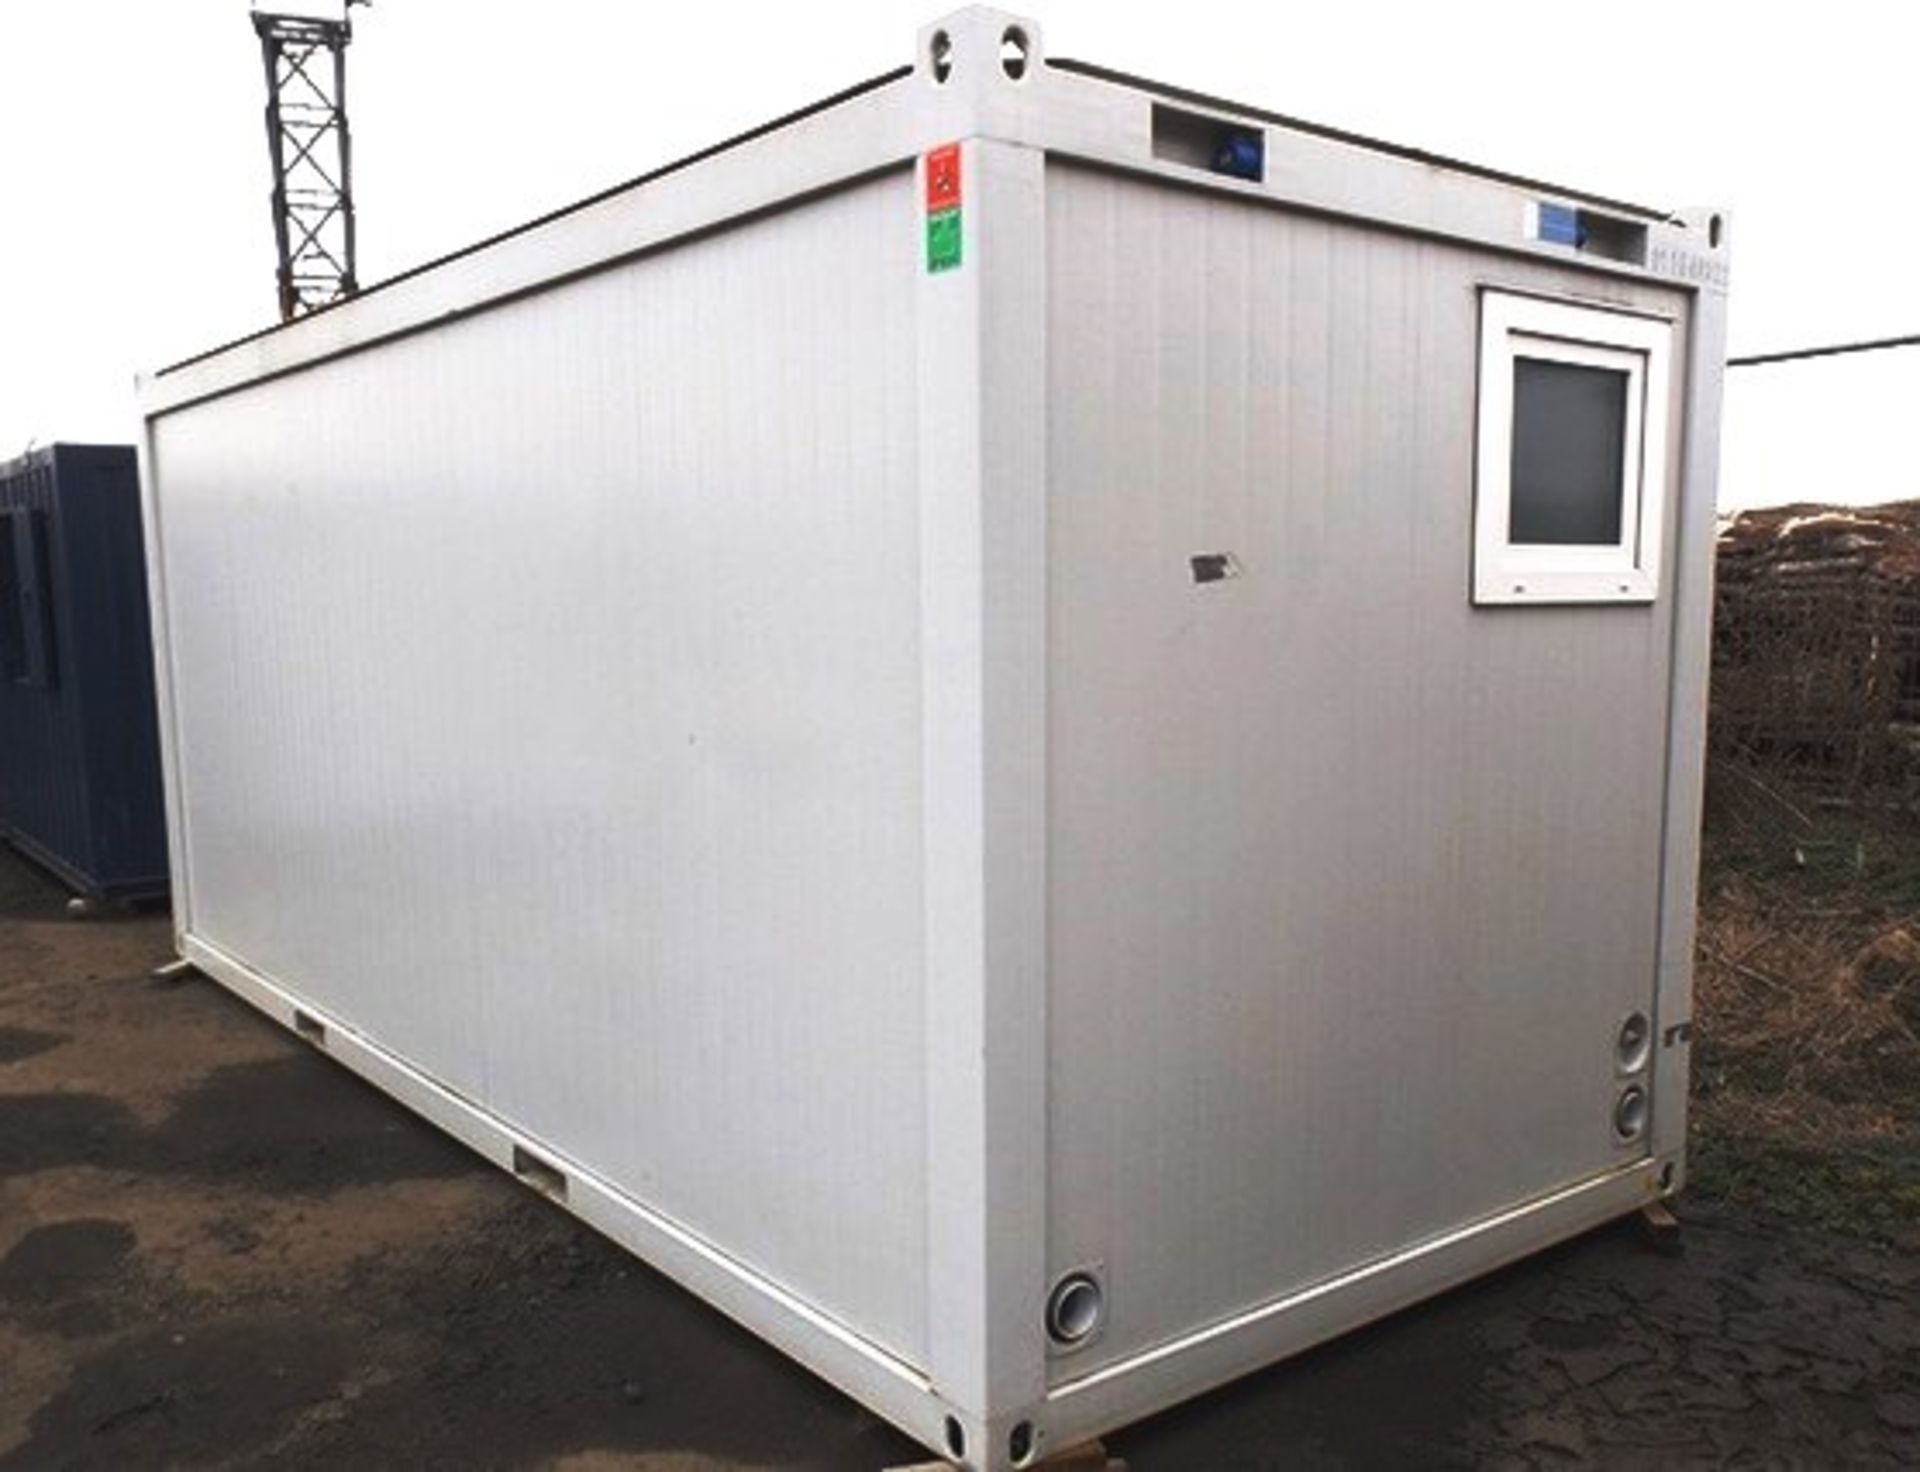 20FT X 8FT EX-DISPLAY SLEEPER UNIT, INSULATED ROOF, WALLS & FLOOR, C/W TOILET, SINK, SHOWER, 2 ELECT - Image 11 of 19